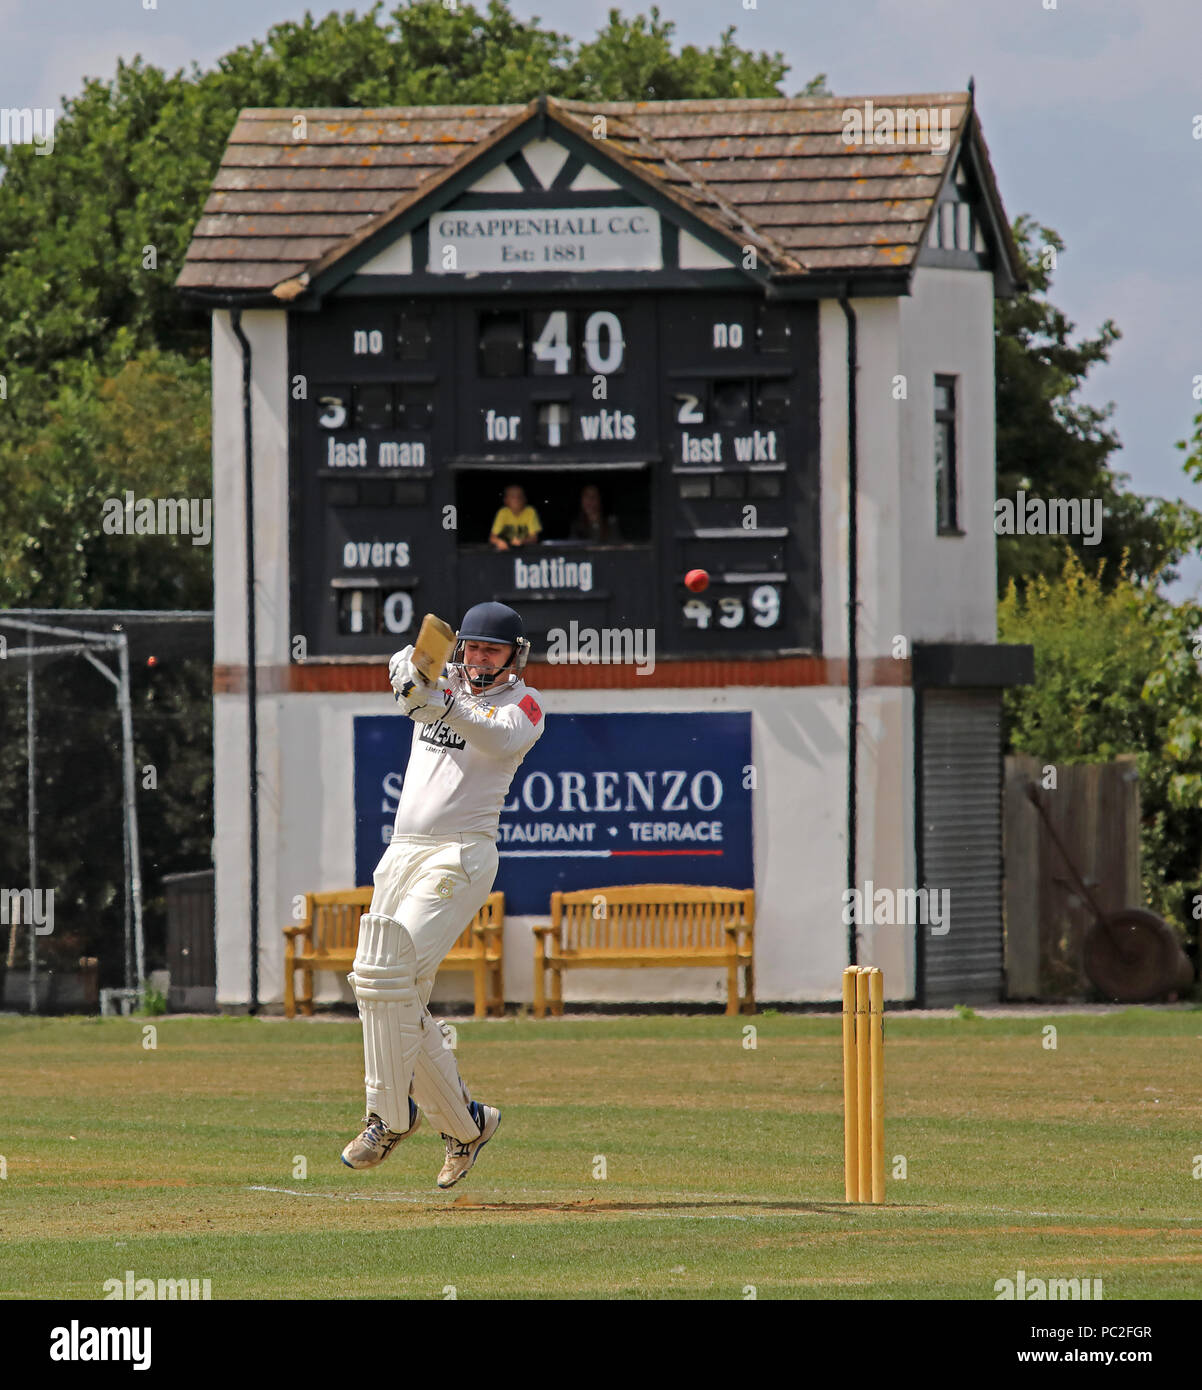 Grappenhall CC ( Grappers ) playing Alderley Edge Cricket Club, at Broad Lane, Grappenhall Village, Warrington, Cheshire, North West England, UK Stock Photo